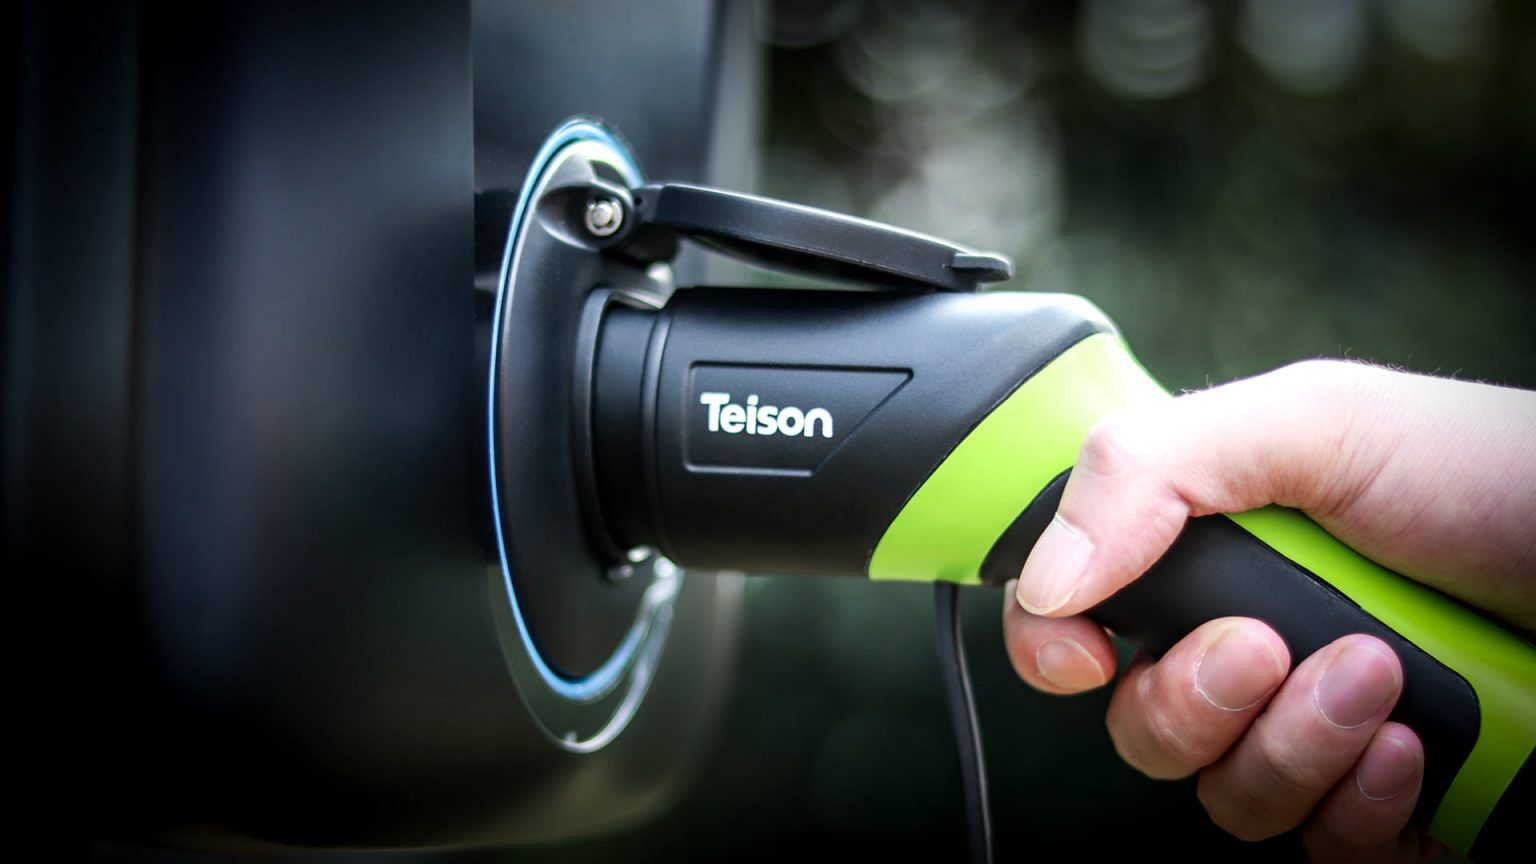 ev charging using teison charger